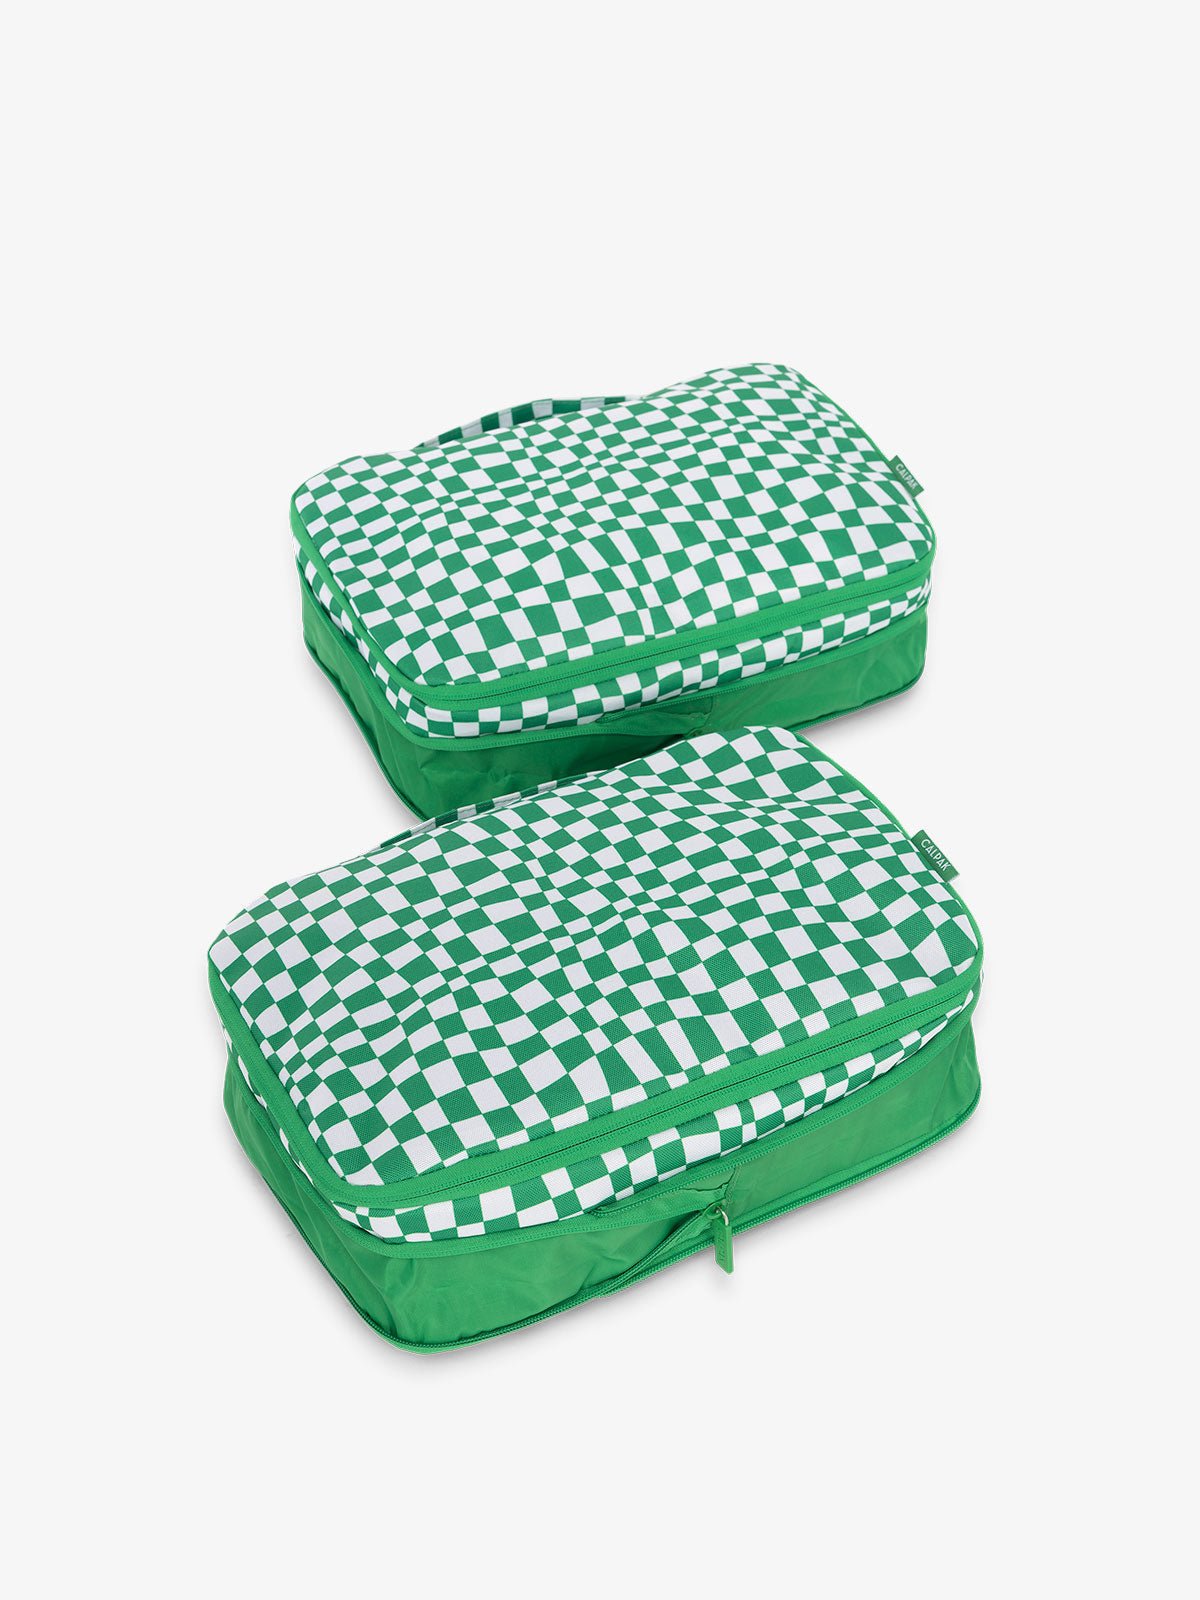 CALPAK compression packing cubes with handles in green checkerboard print